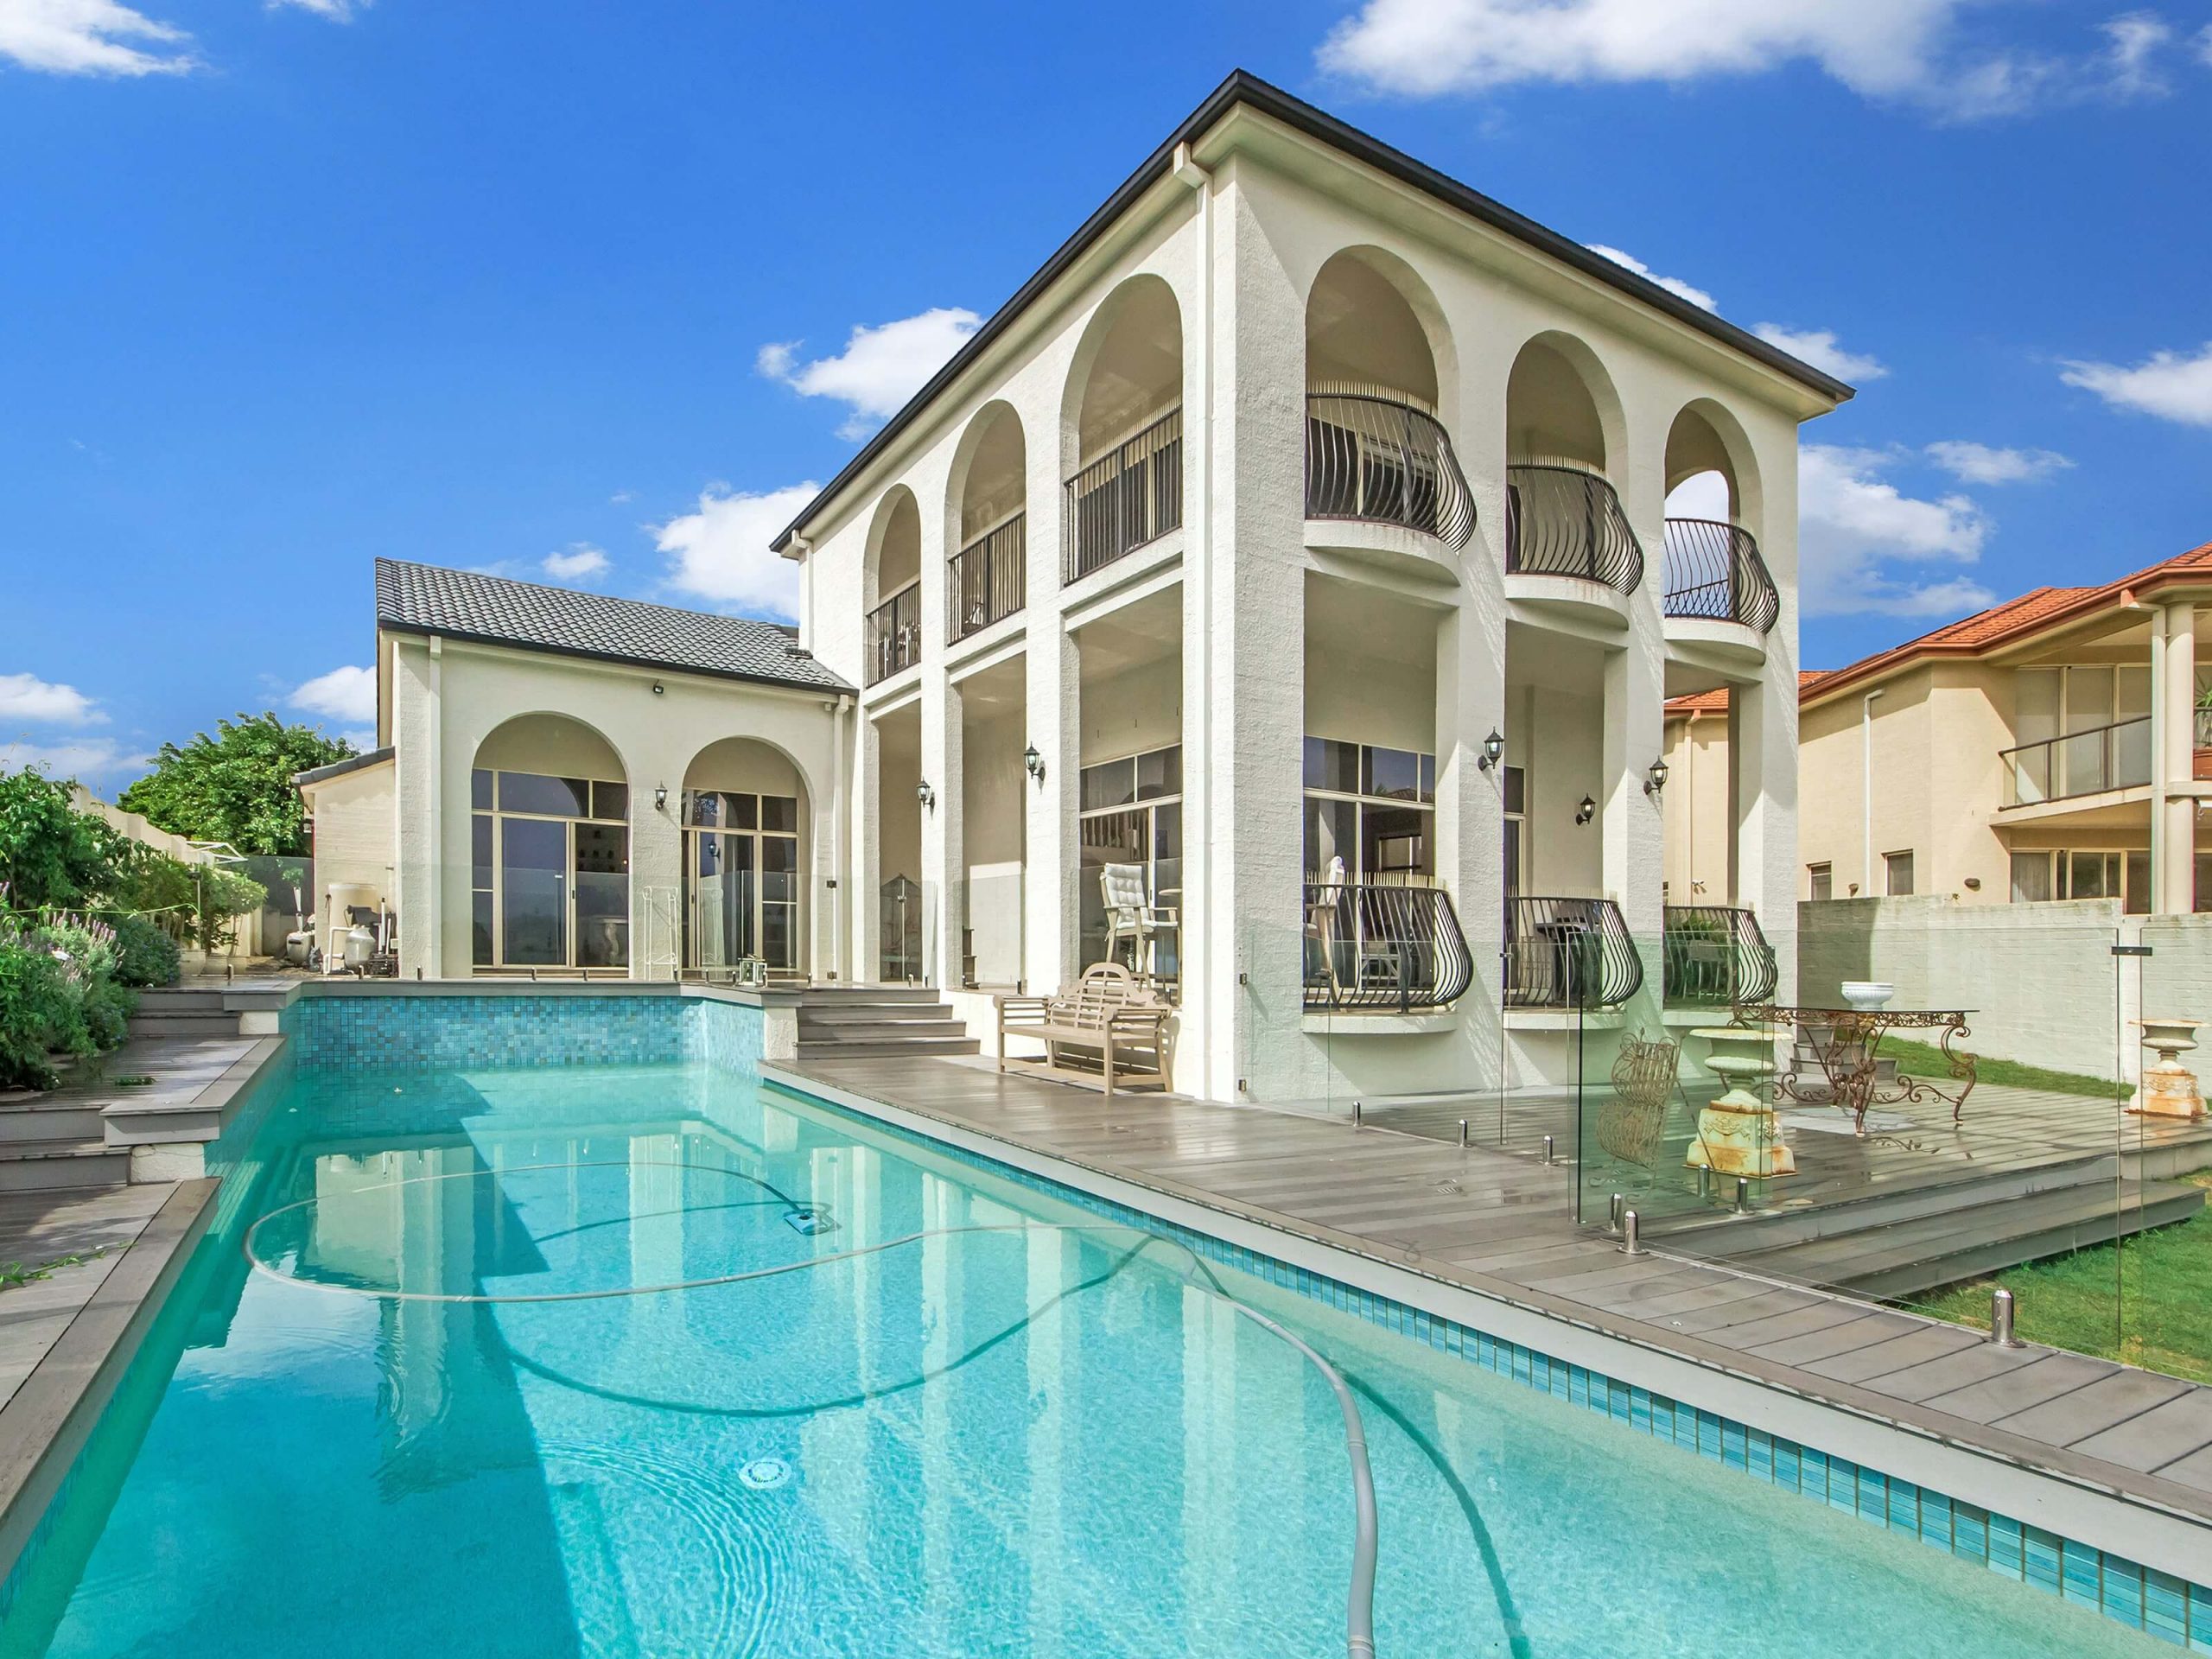 large, two-story stucco house with swimming pool